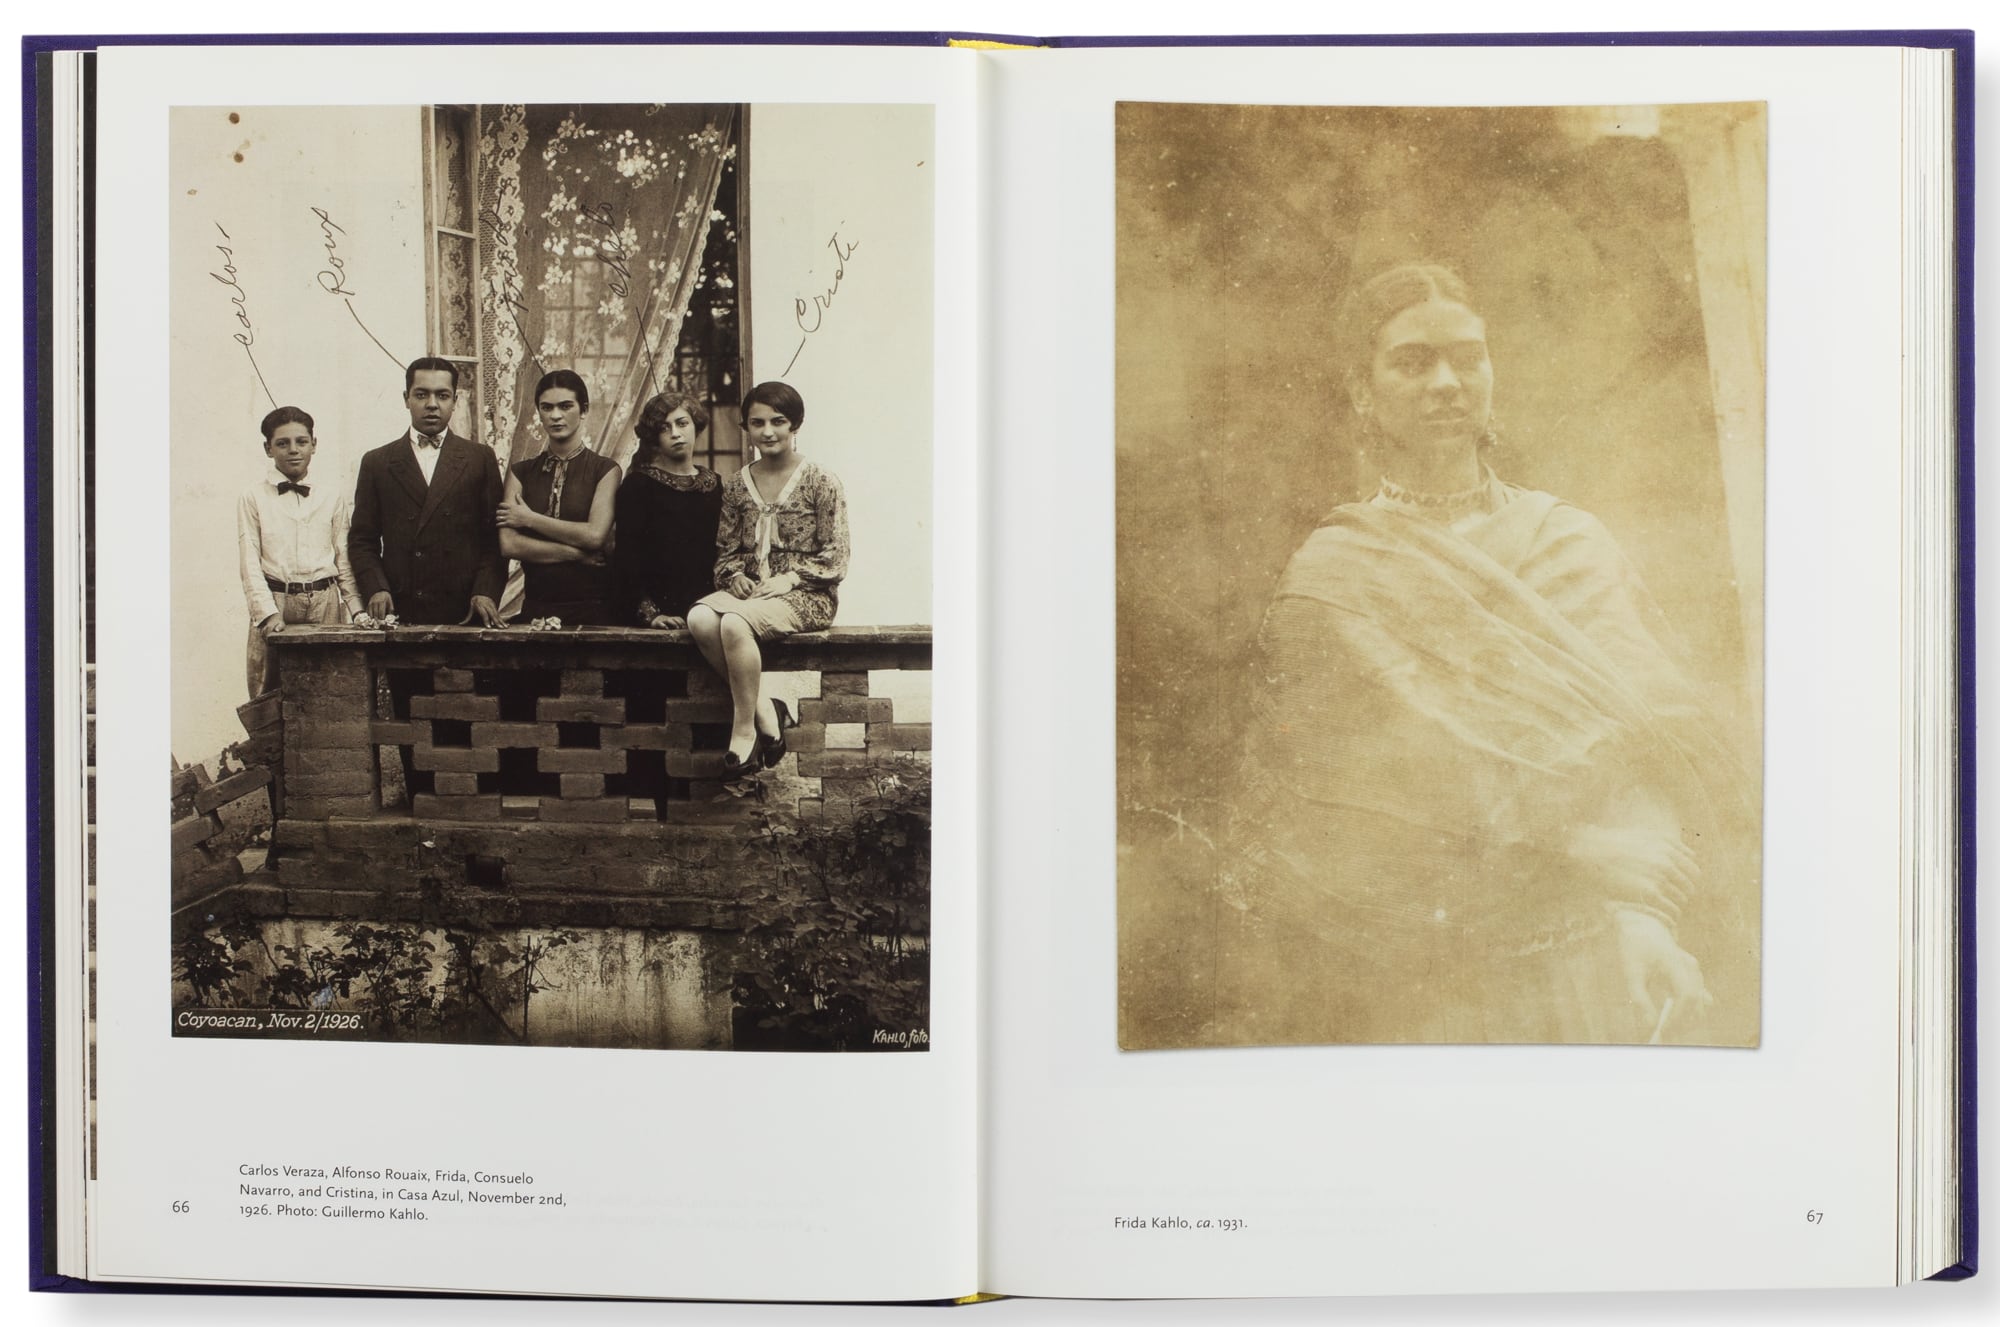 a book spread open with two images. on the left: a group portrait on a balcony. right: a hazy portrait of frida